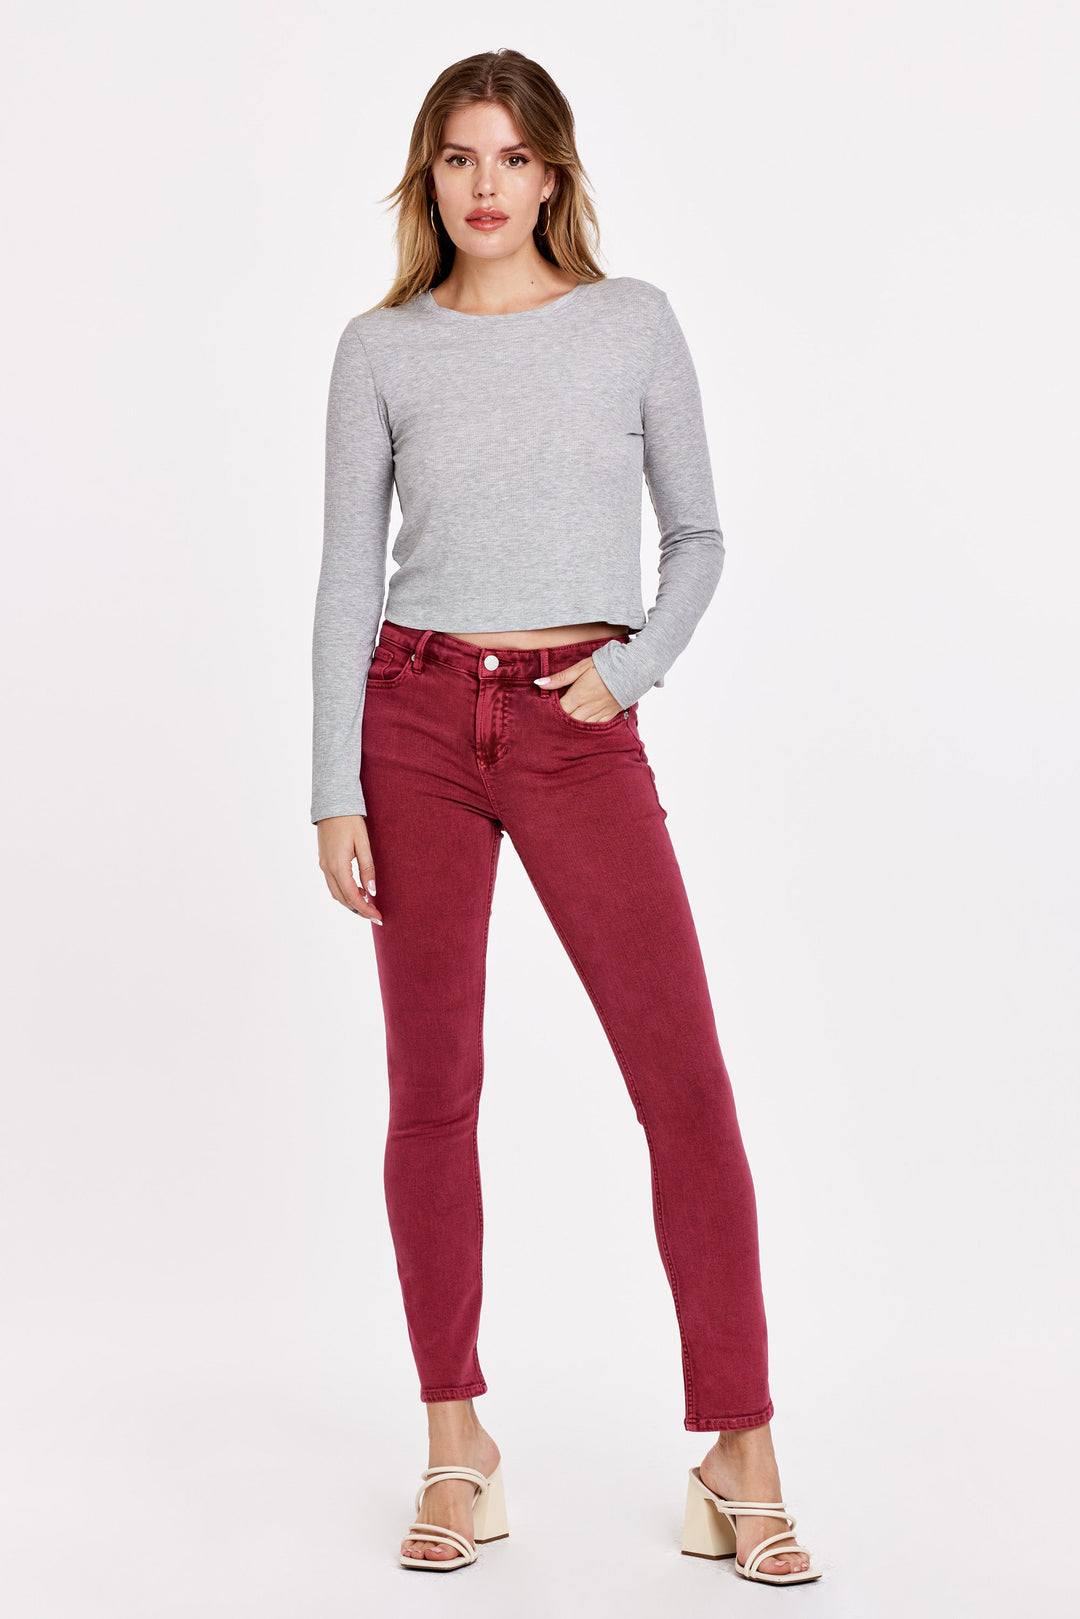 blaire-high-rise-slim-straight-jeans-ruby-falls